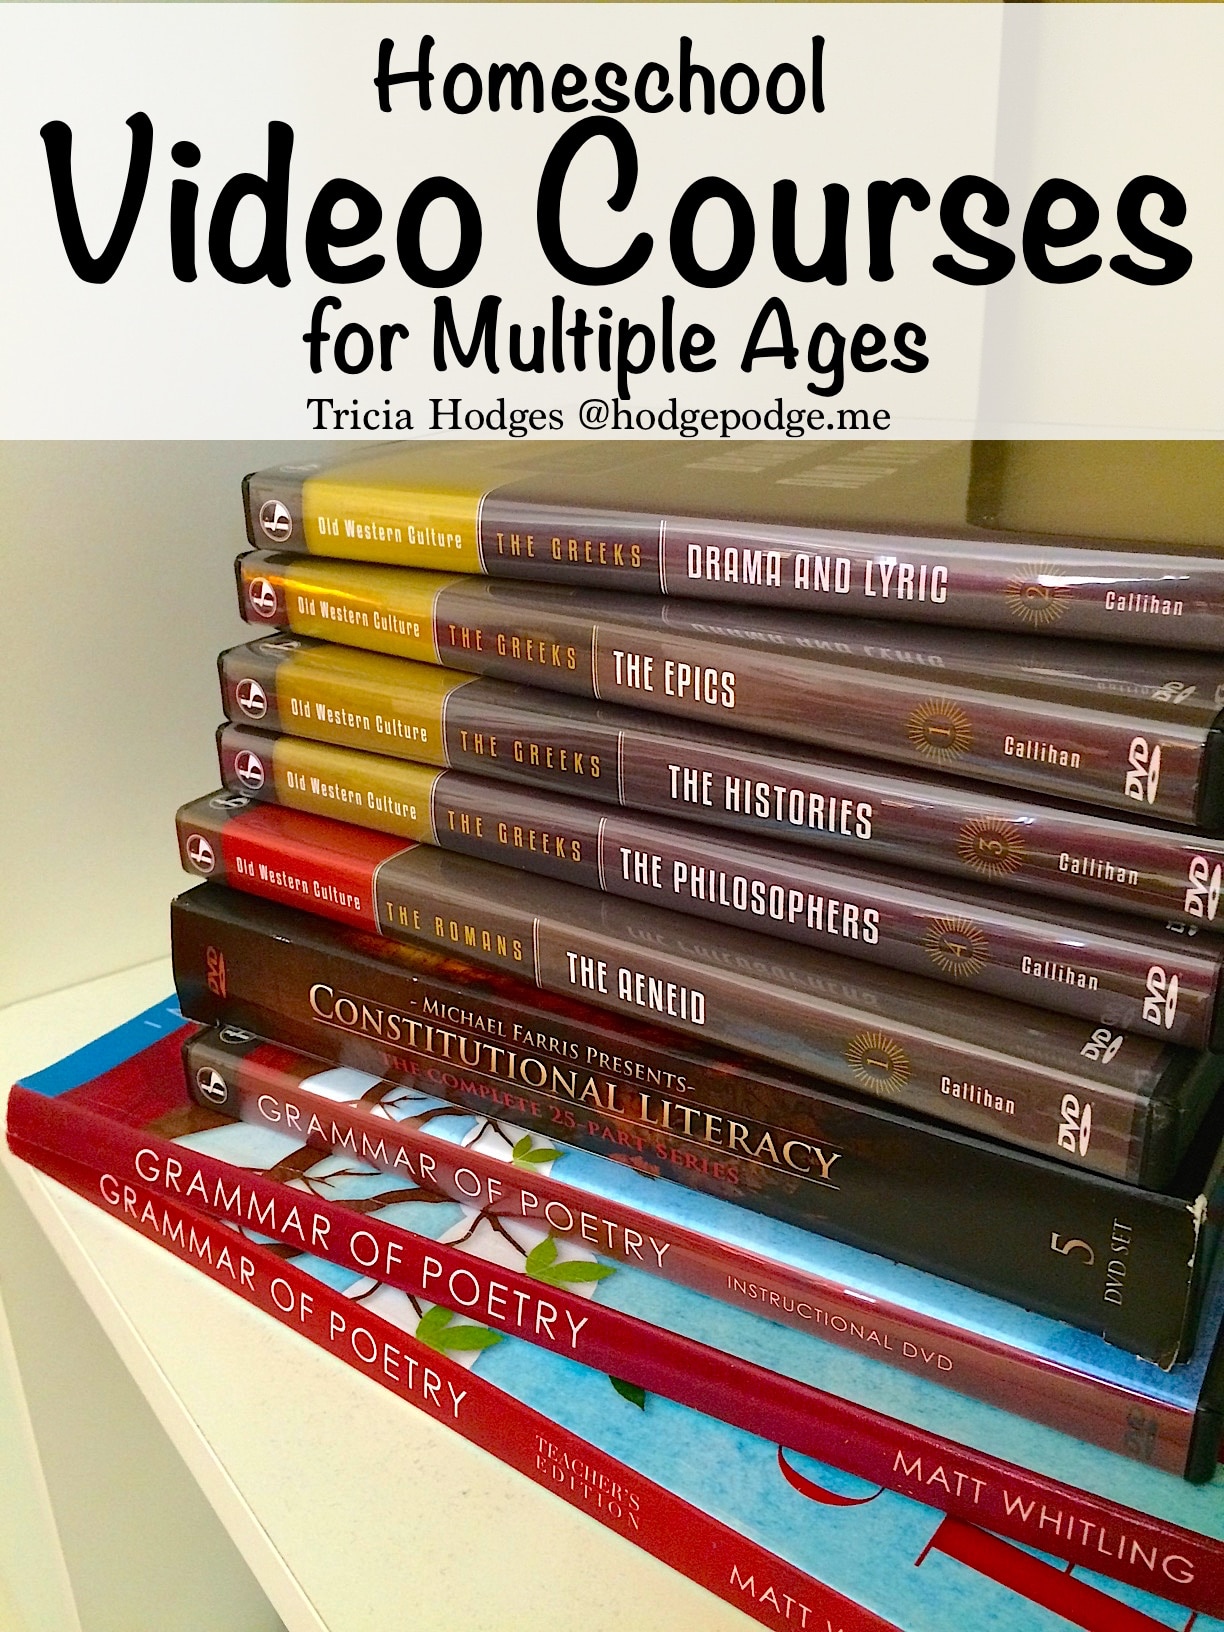 Homeschool Video Courses for Multiple Ages